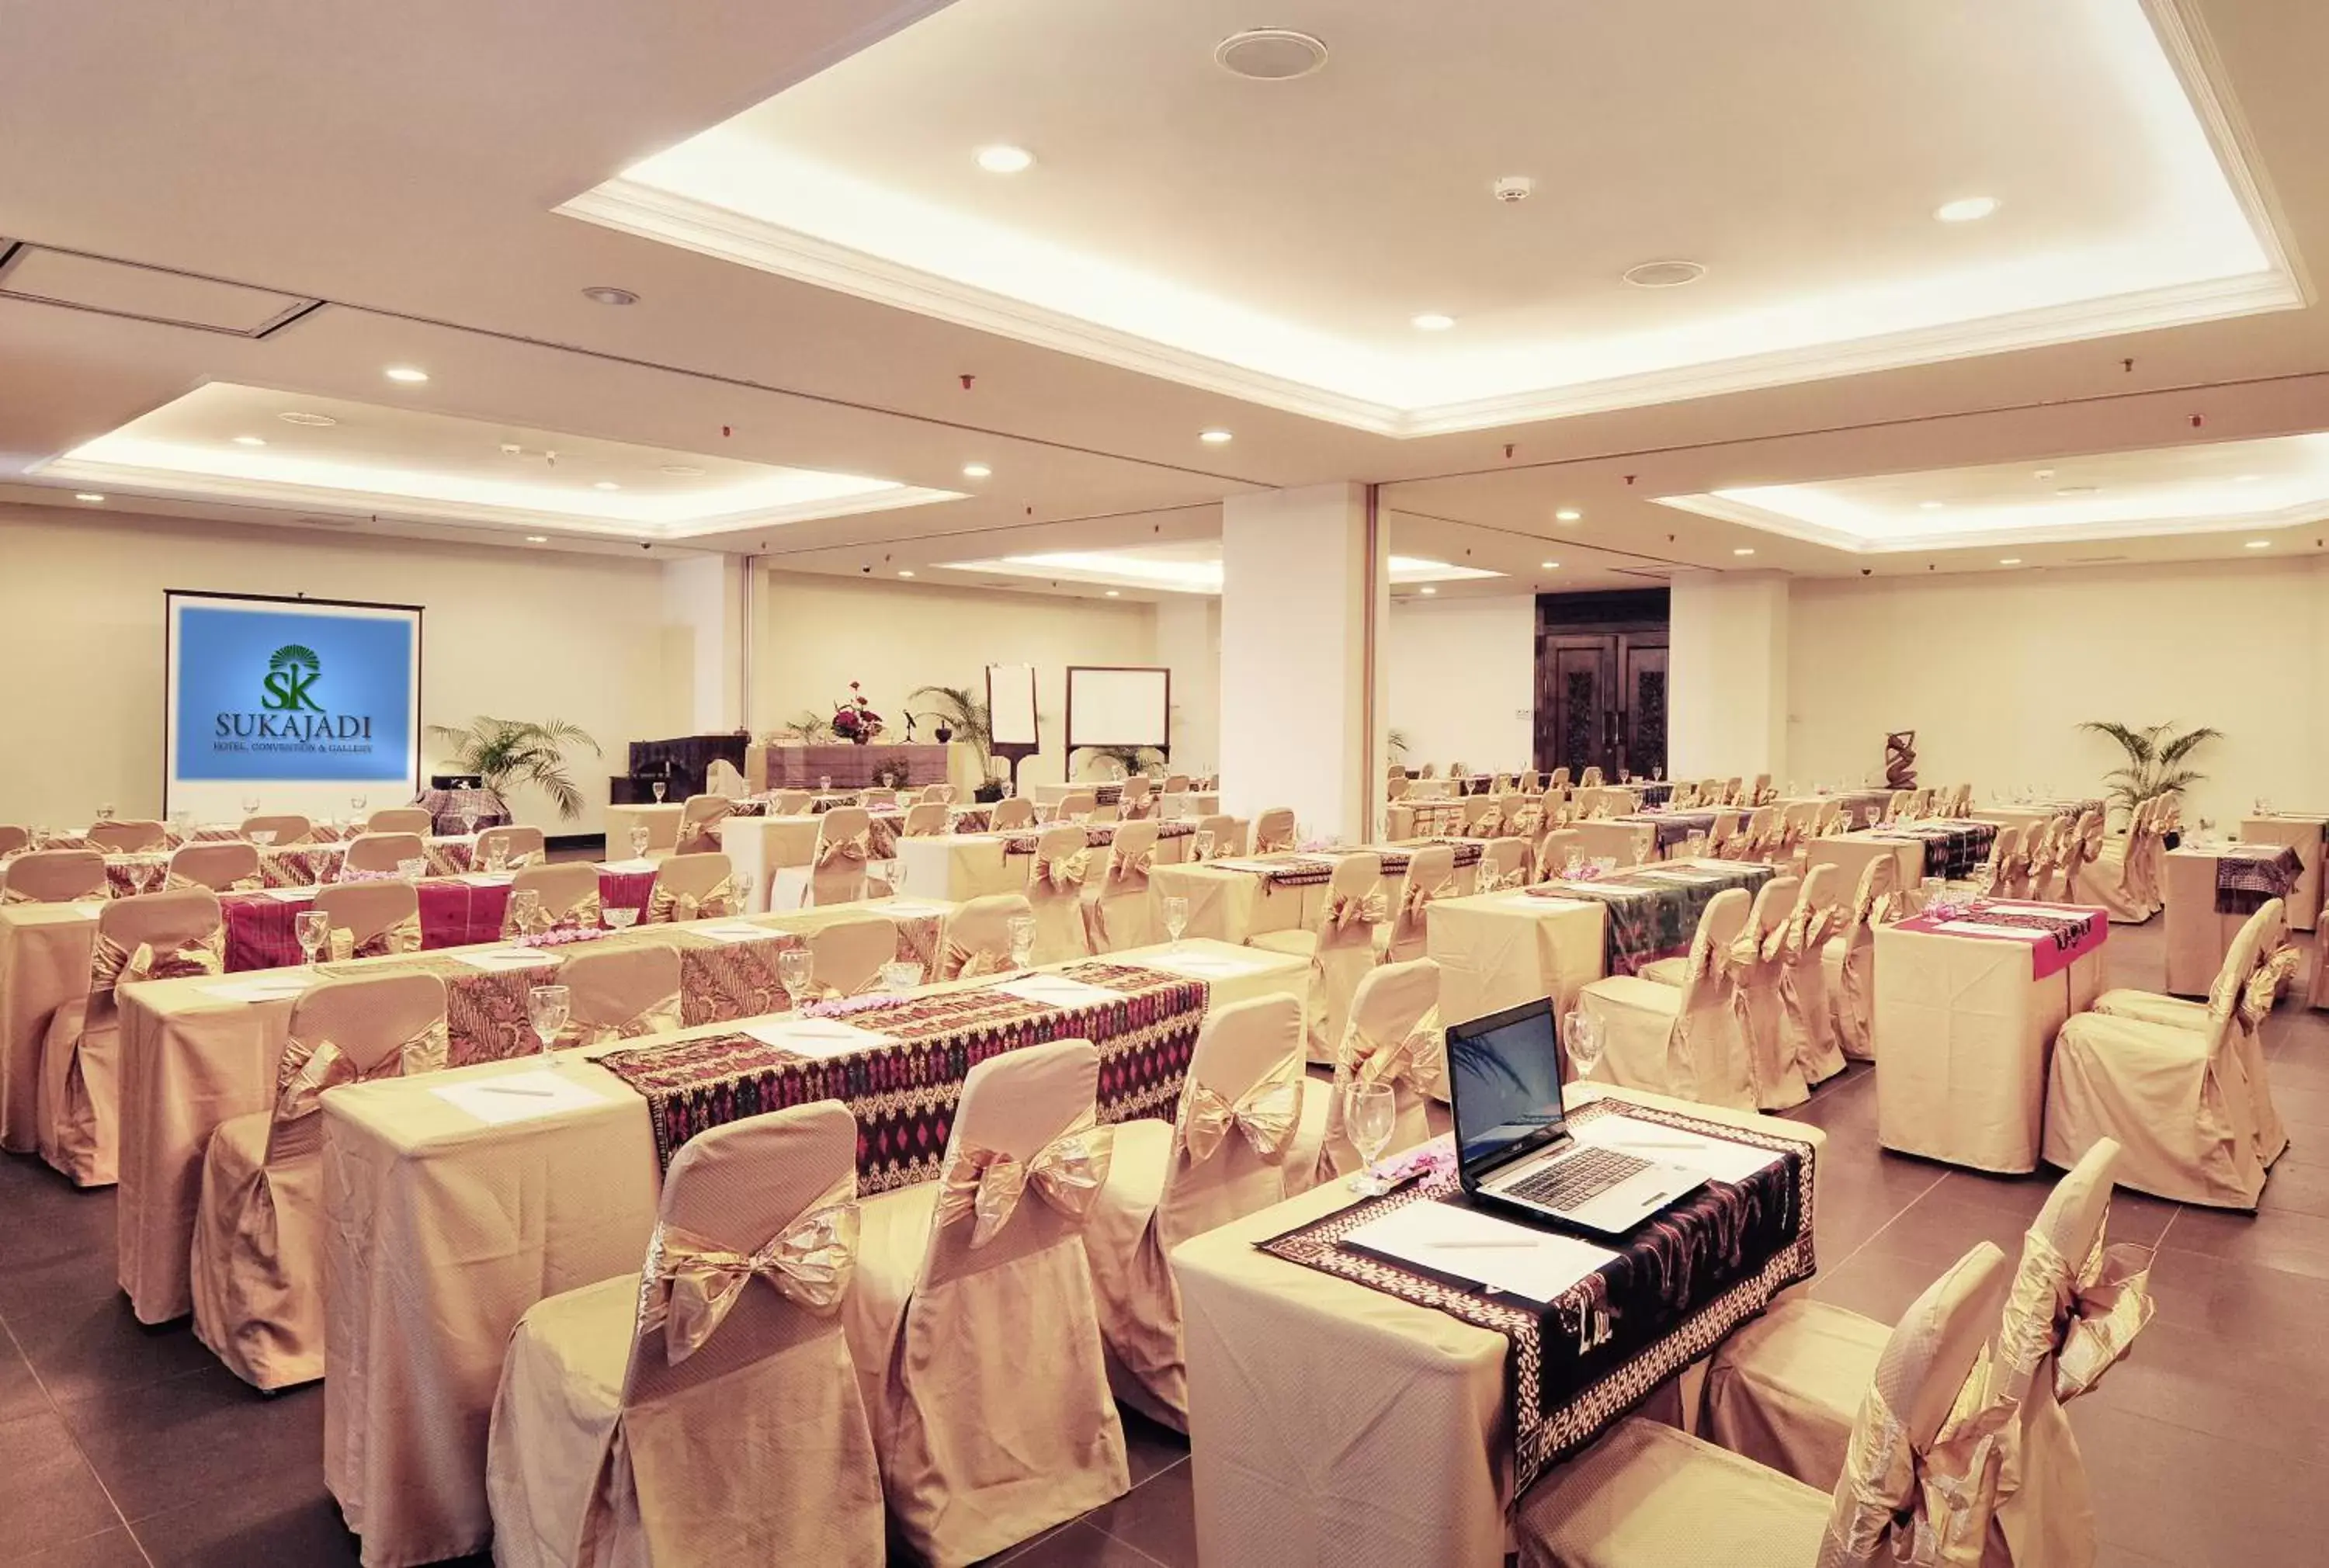 Business facilities, Banquet Facilities in Sukajadi Hotel, Convention and Gallery